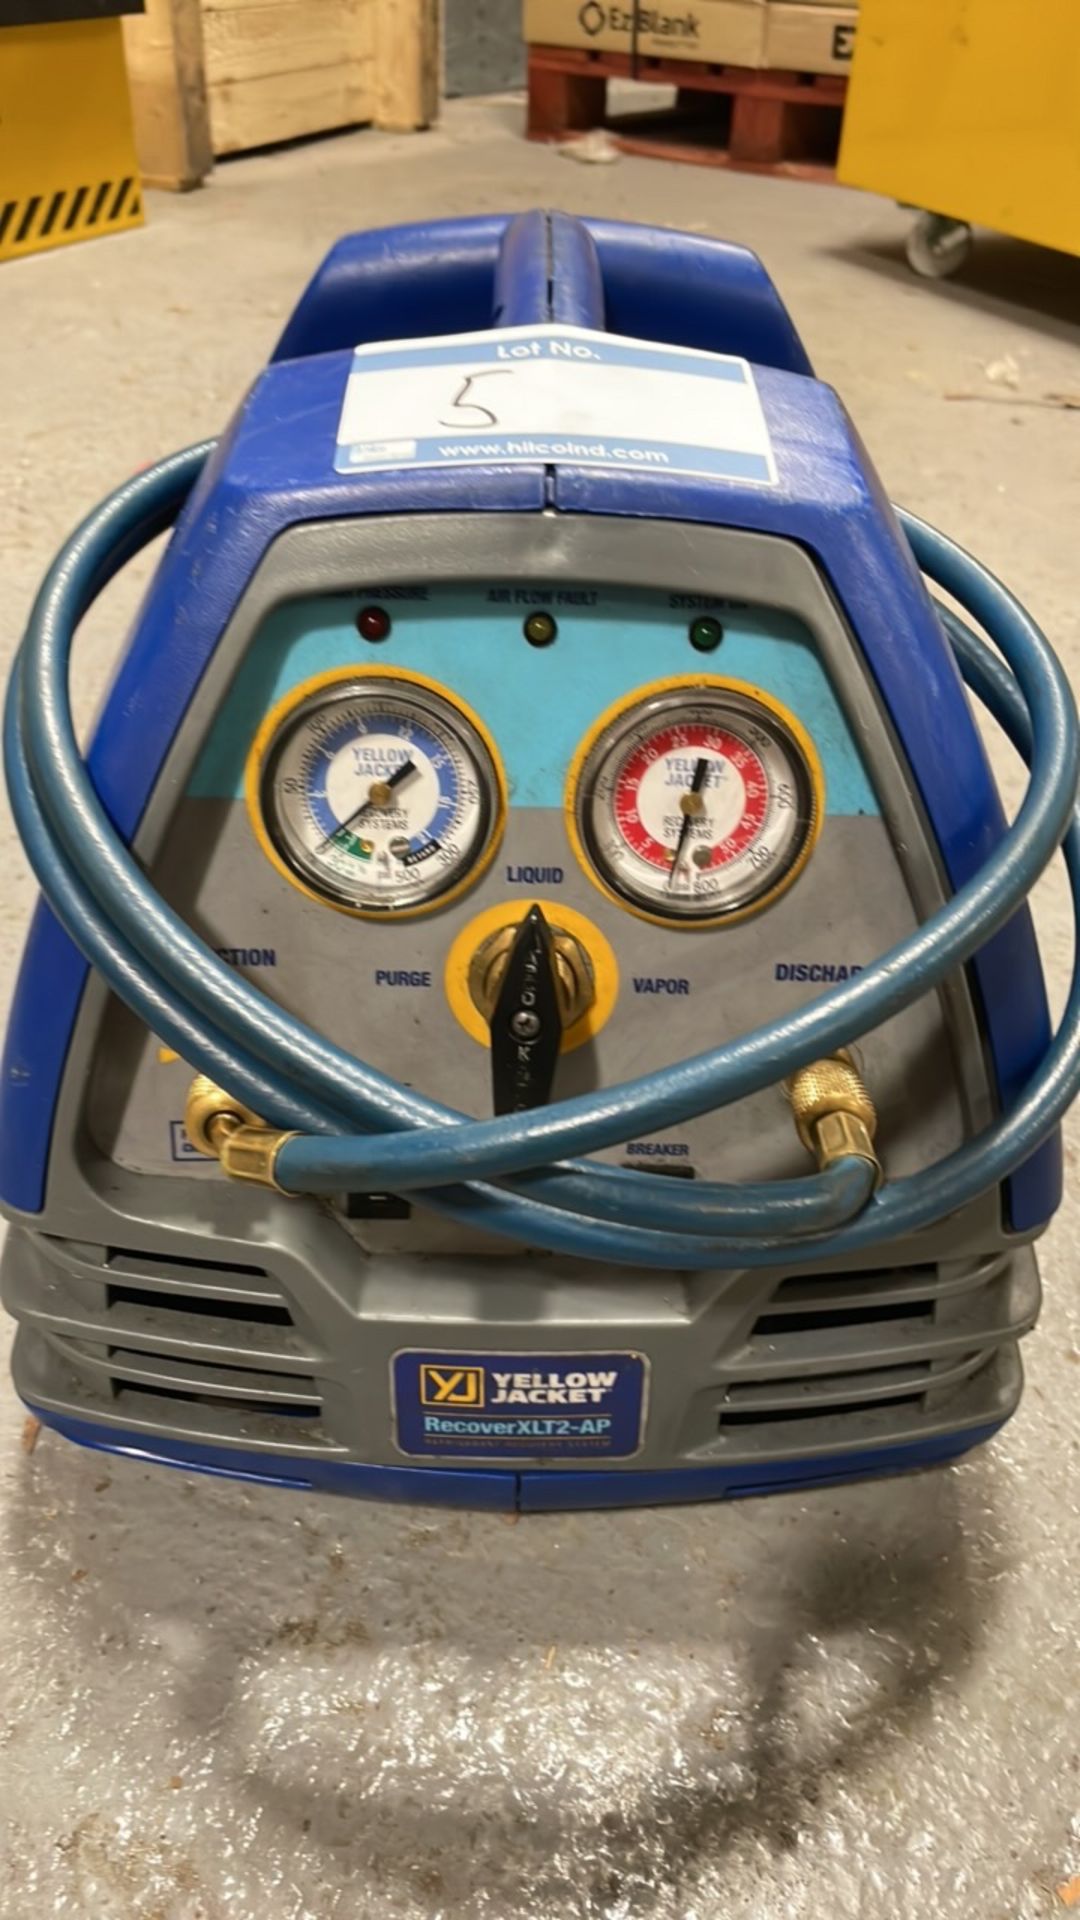 Yellow Jacket RecoverXLT Refrigerant Recovery Unit - Image 4 of 6